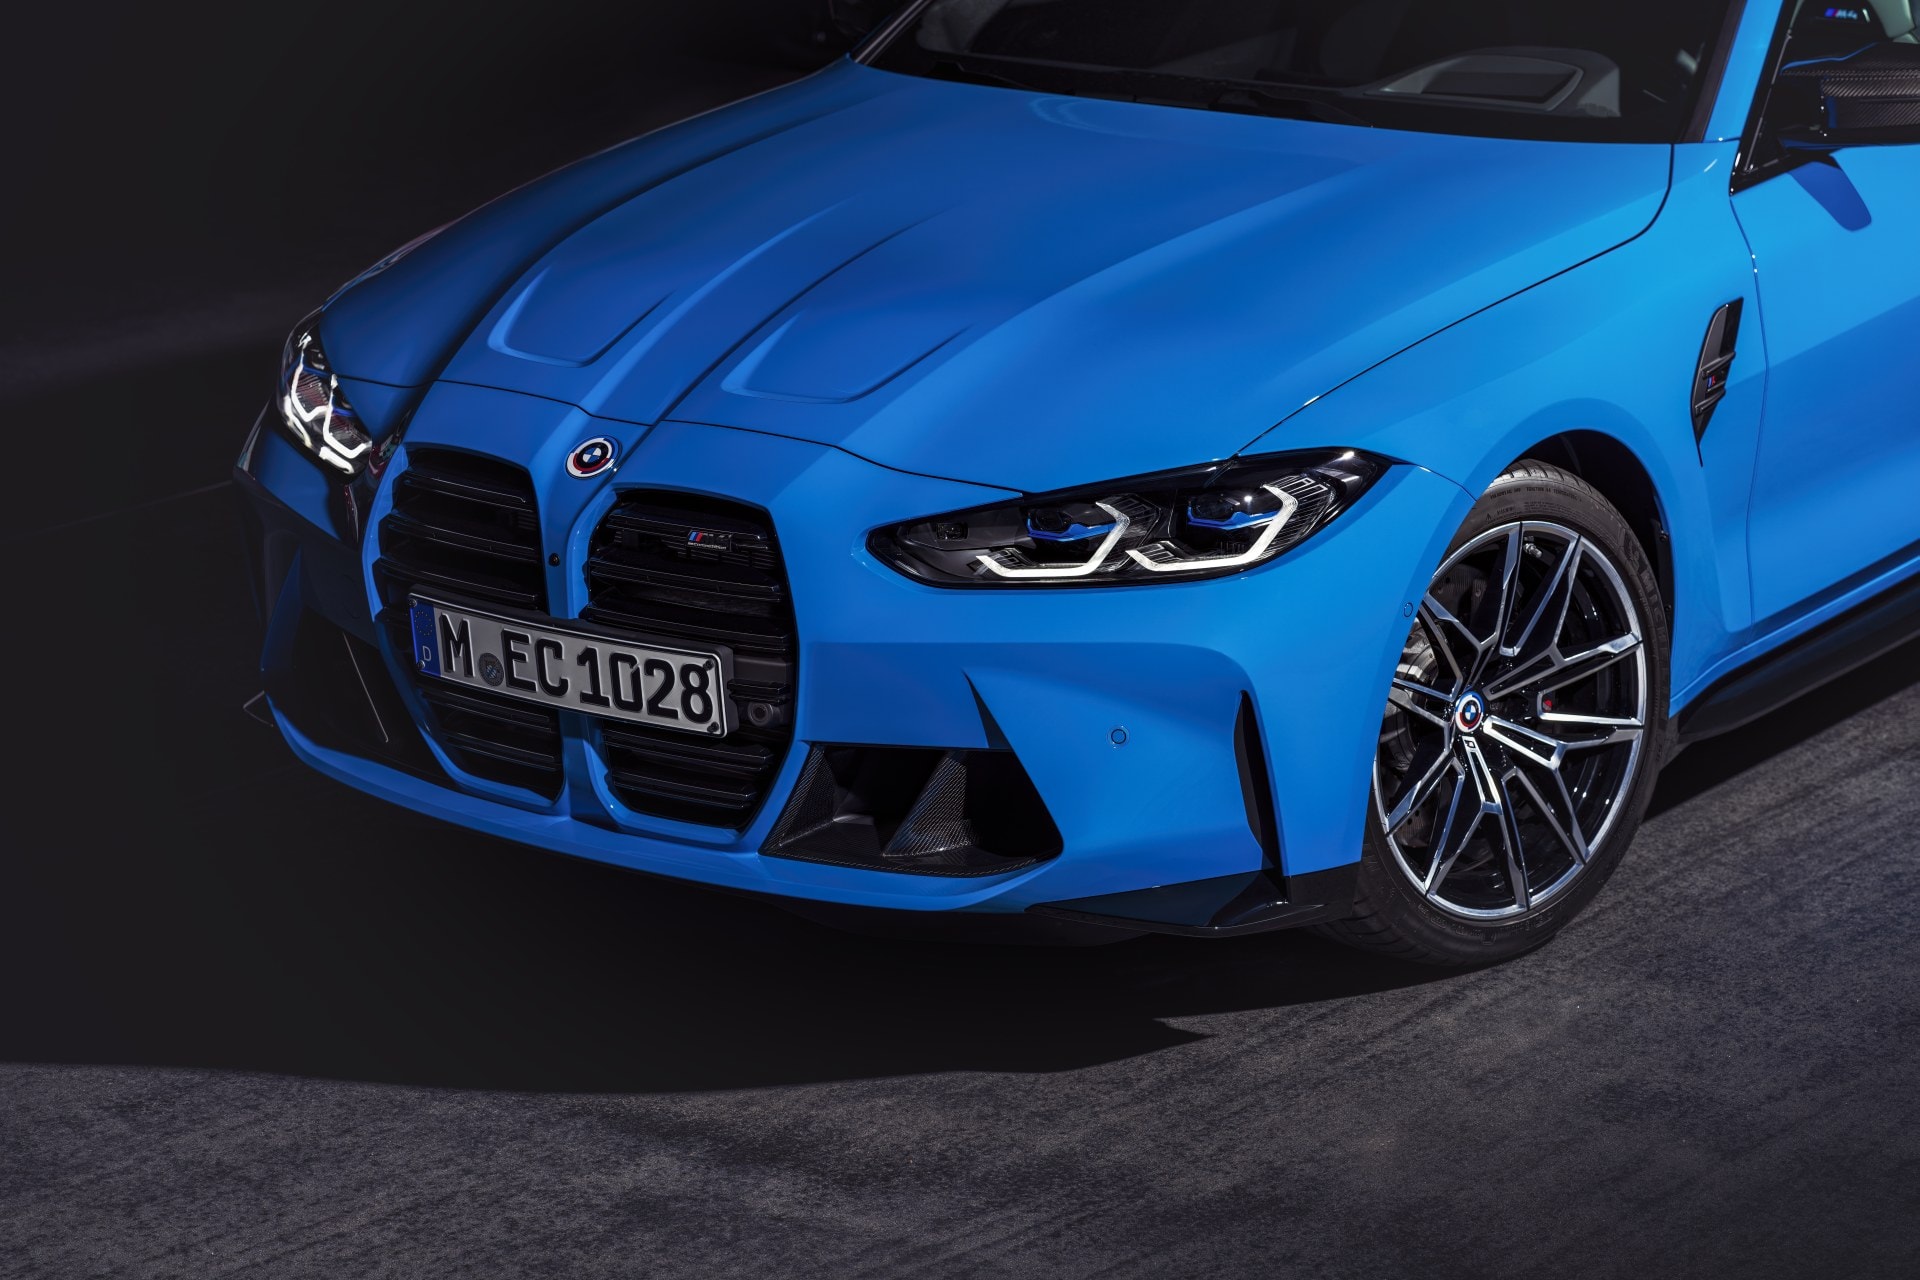 This Is What You Will Get With a LimitedEdition 50th Anniversary BMW M